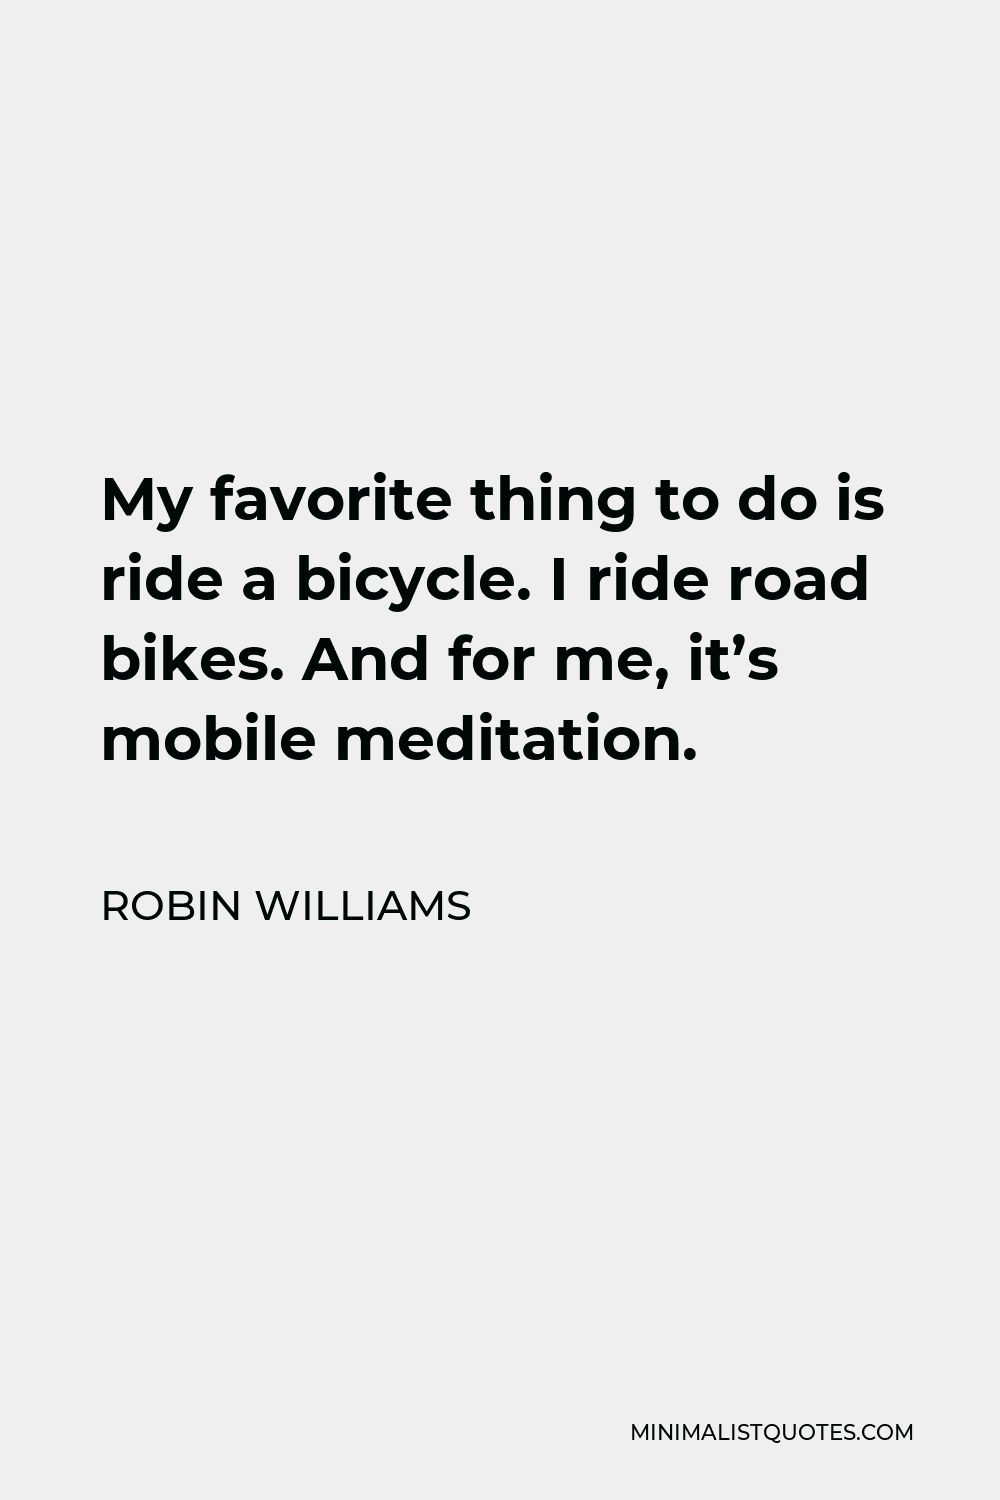 Robin Williams Quote - My favorite thing to do is ride a bicycle. I ride road bikes. And for me, it’s mobile meditation.